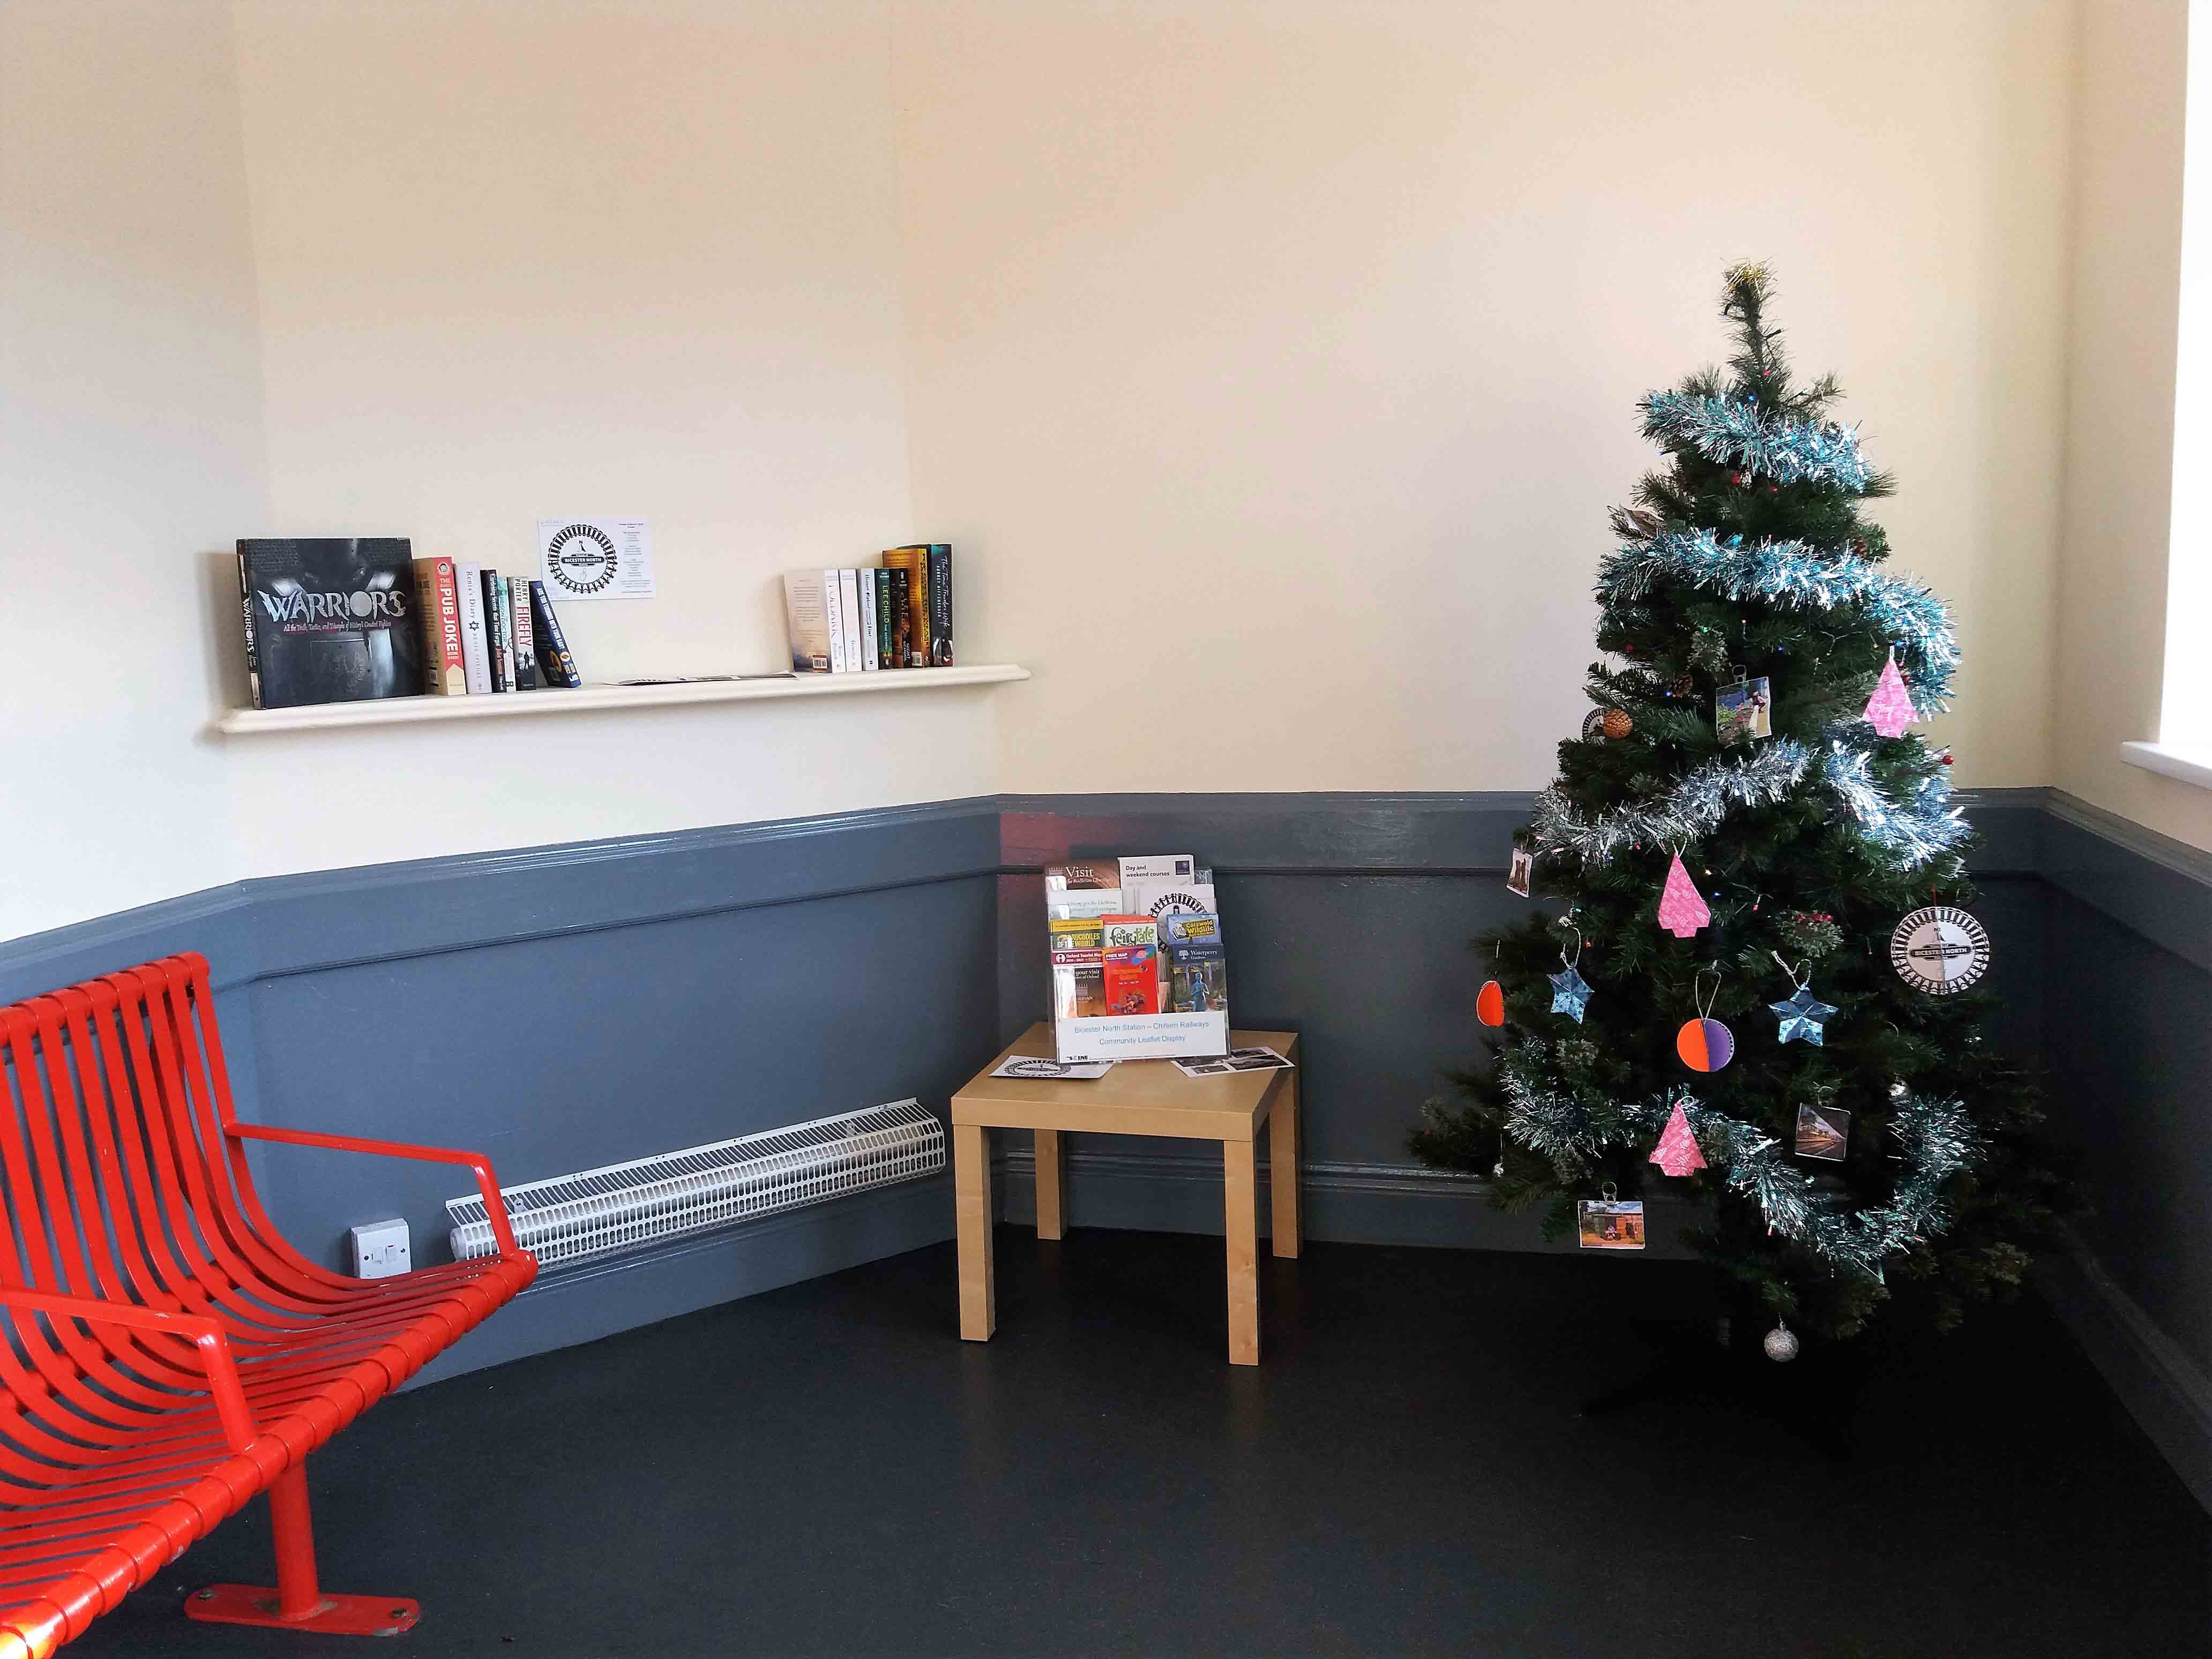 Community books and Christmas tree installed by the Friends of Bicester North station in the waiting room